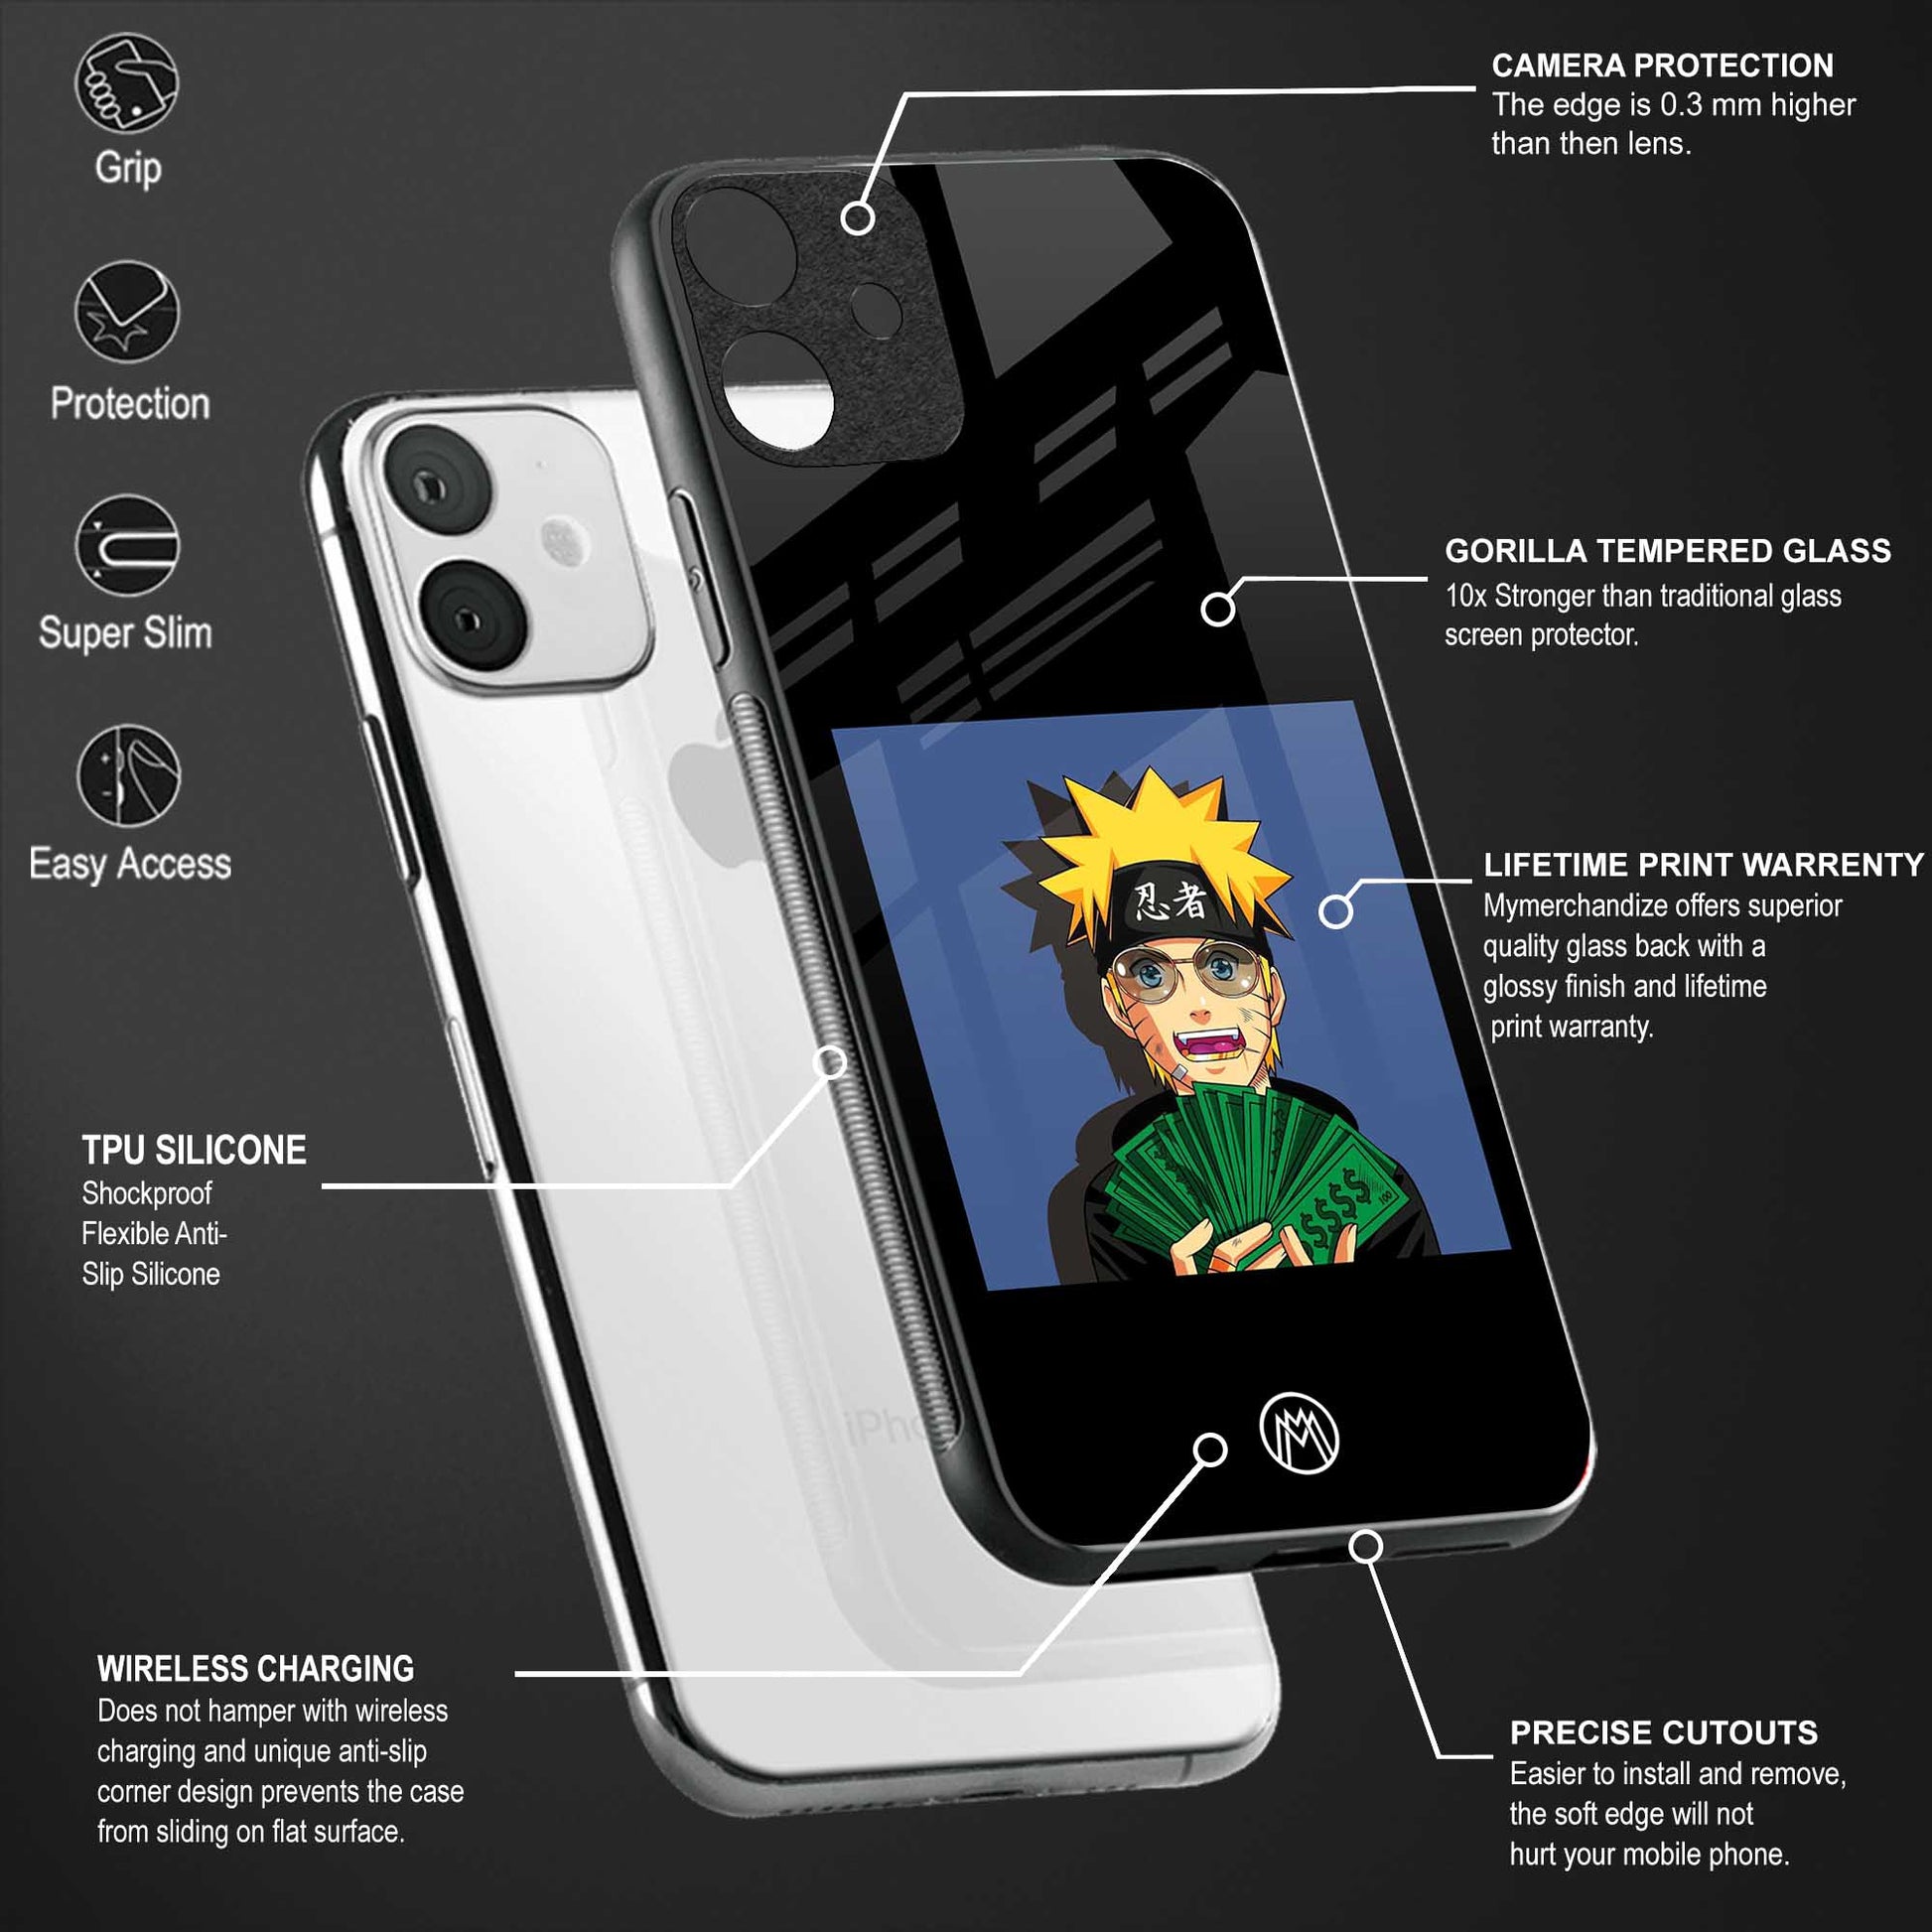 naruto hypebeast back phone cover | glass case for oppo reno 5